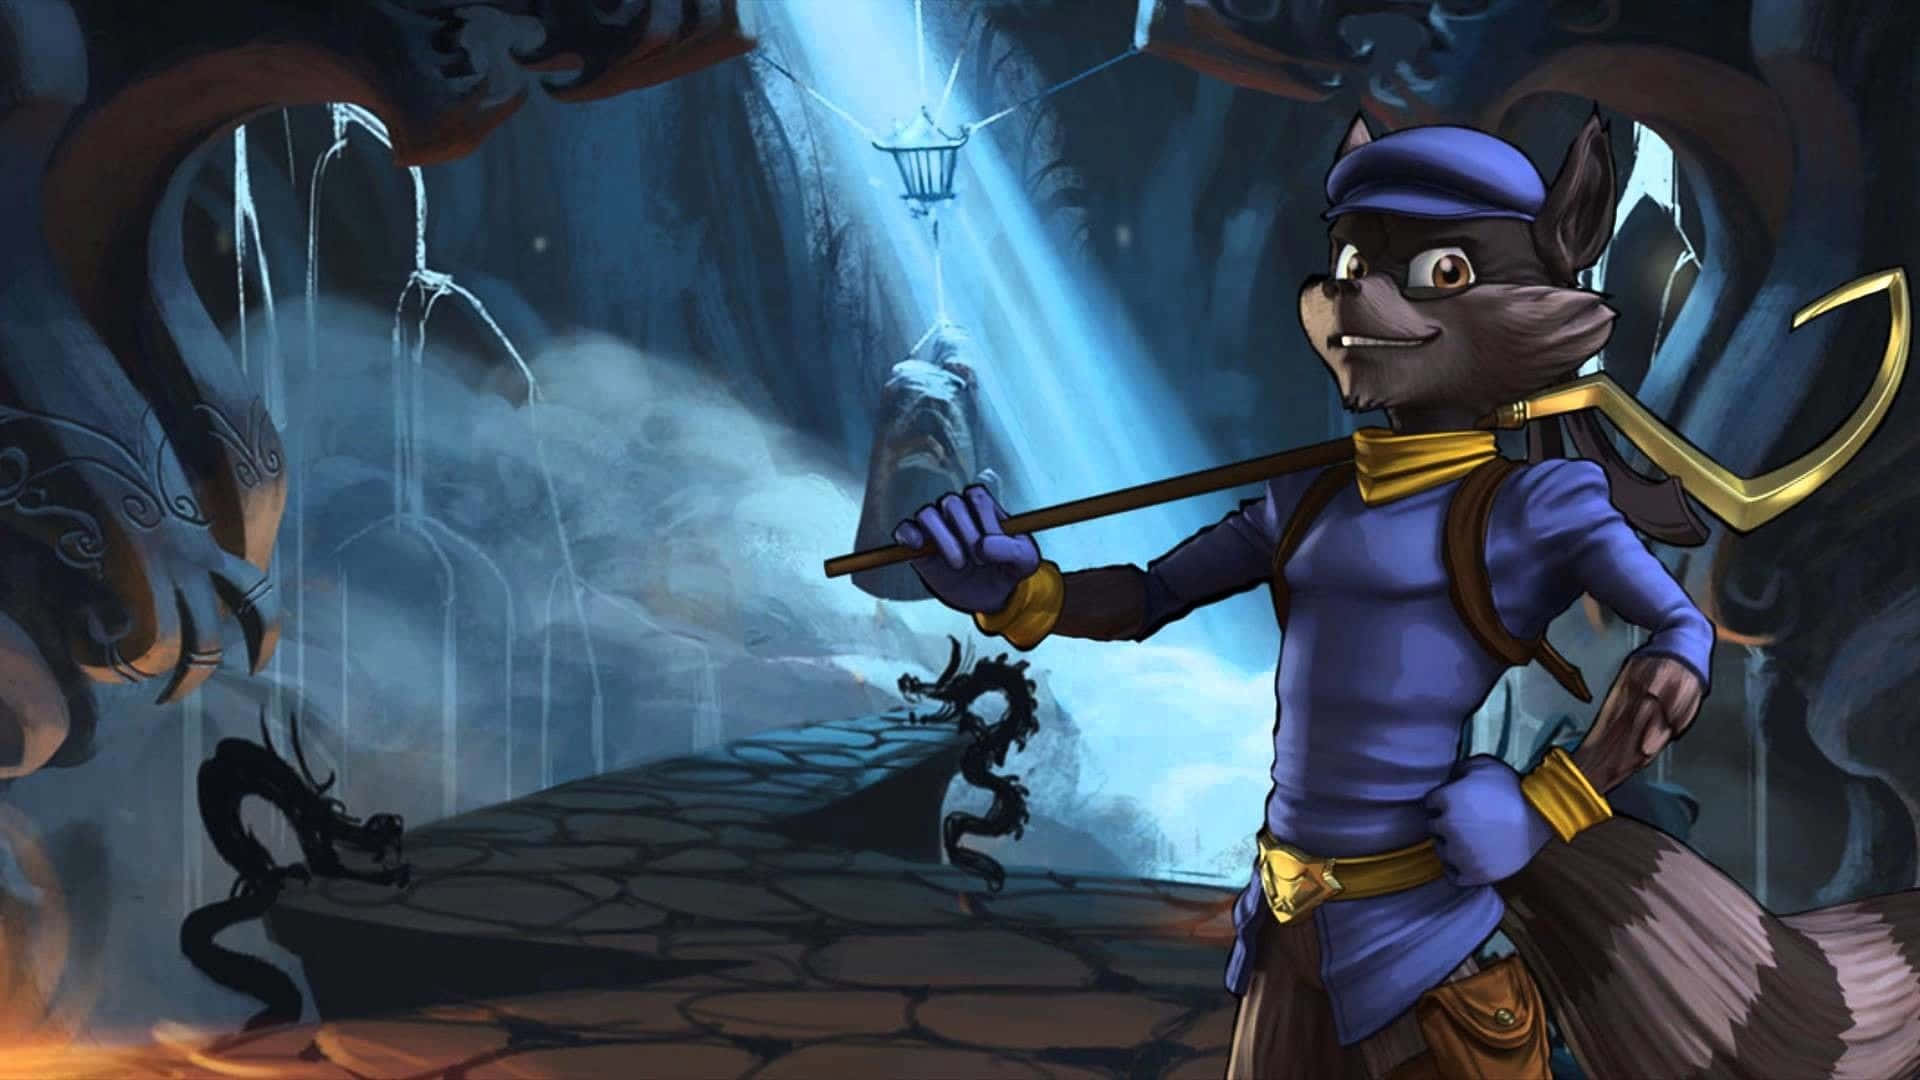 Sly Cooper In The Underground Wallpaper